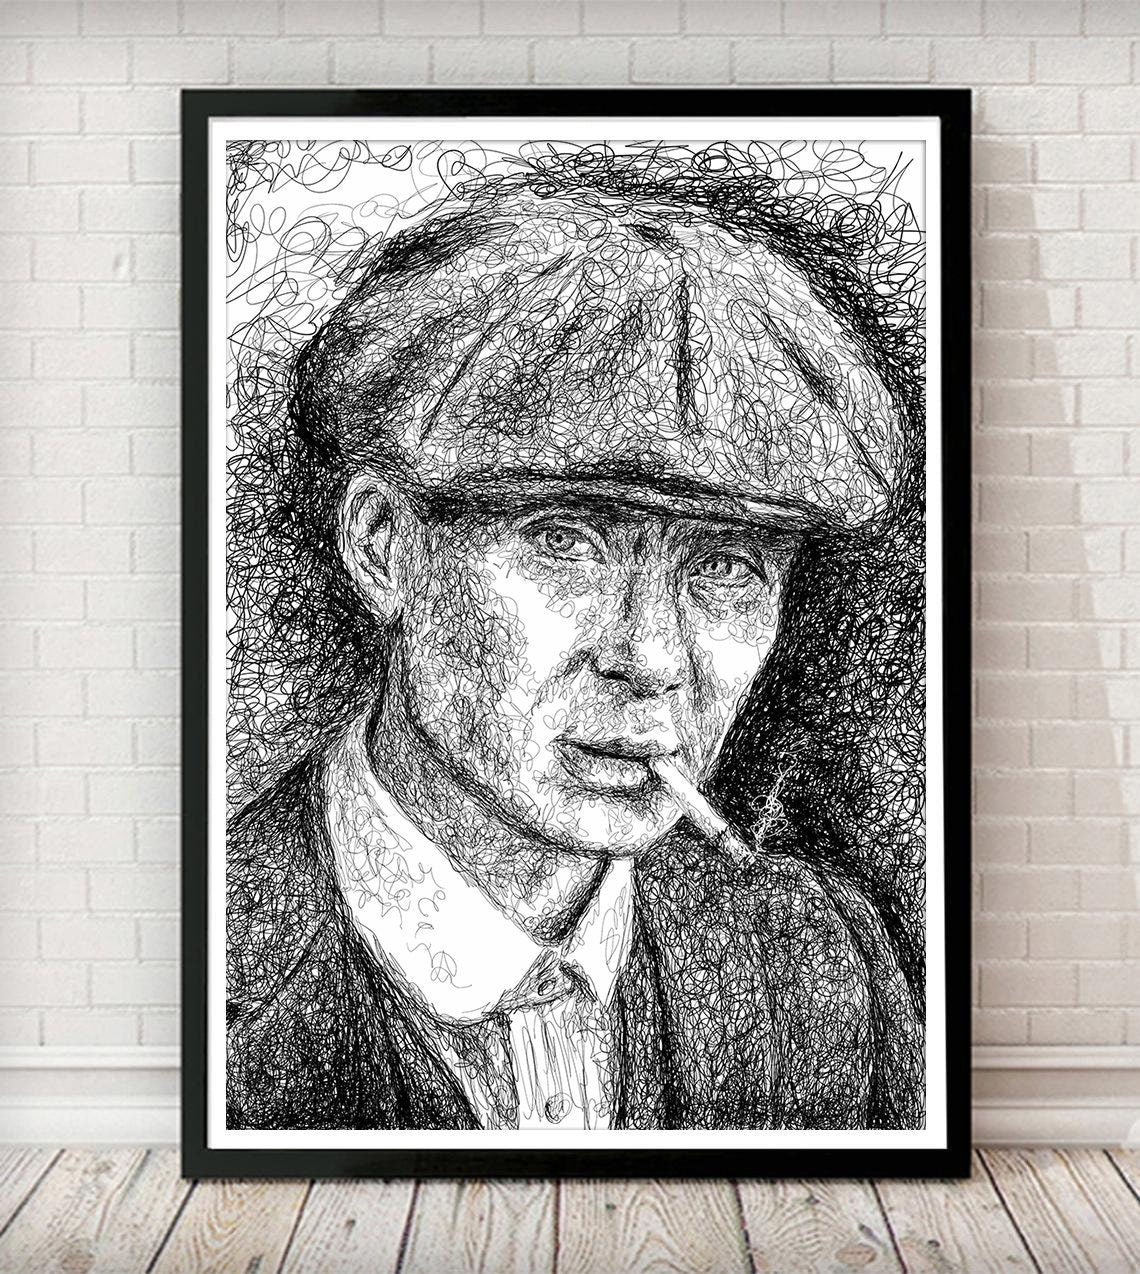 Cillian Murphy as Thomas Shelby art print unframed, Peaky Blinders, Tommy Shelby, Cillian Murphy poster, Line art, abstract line art